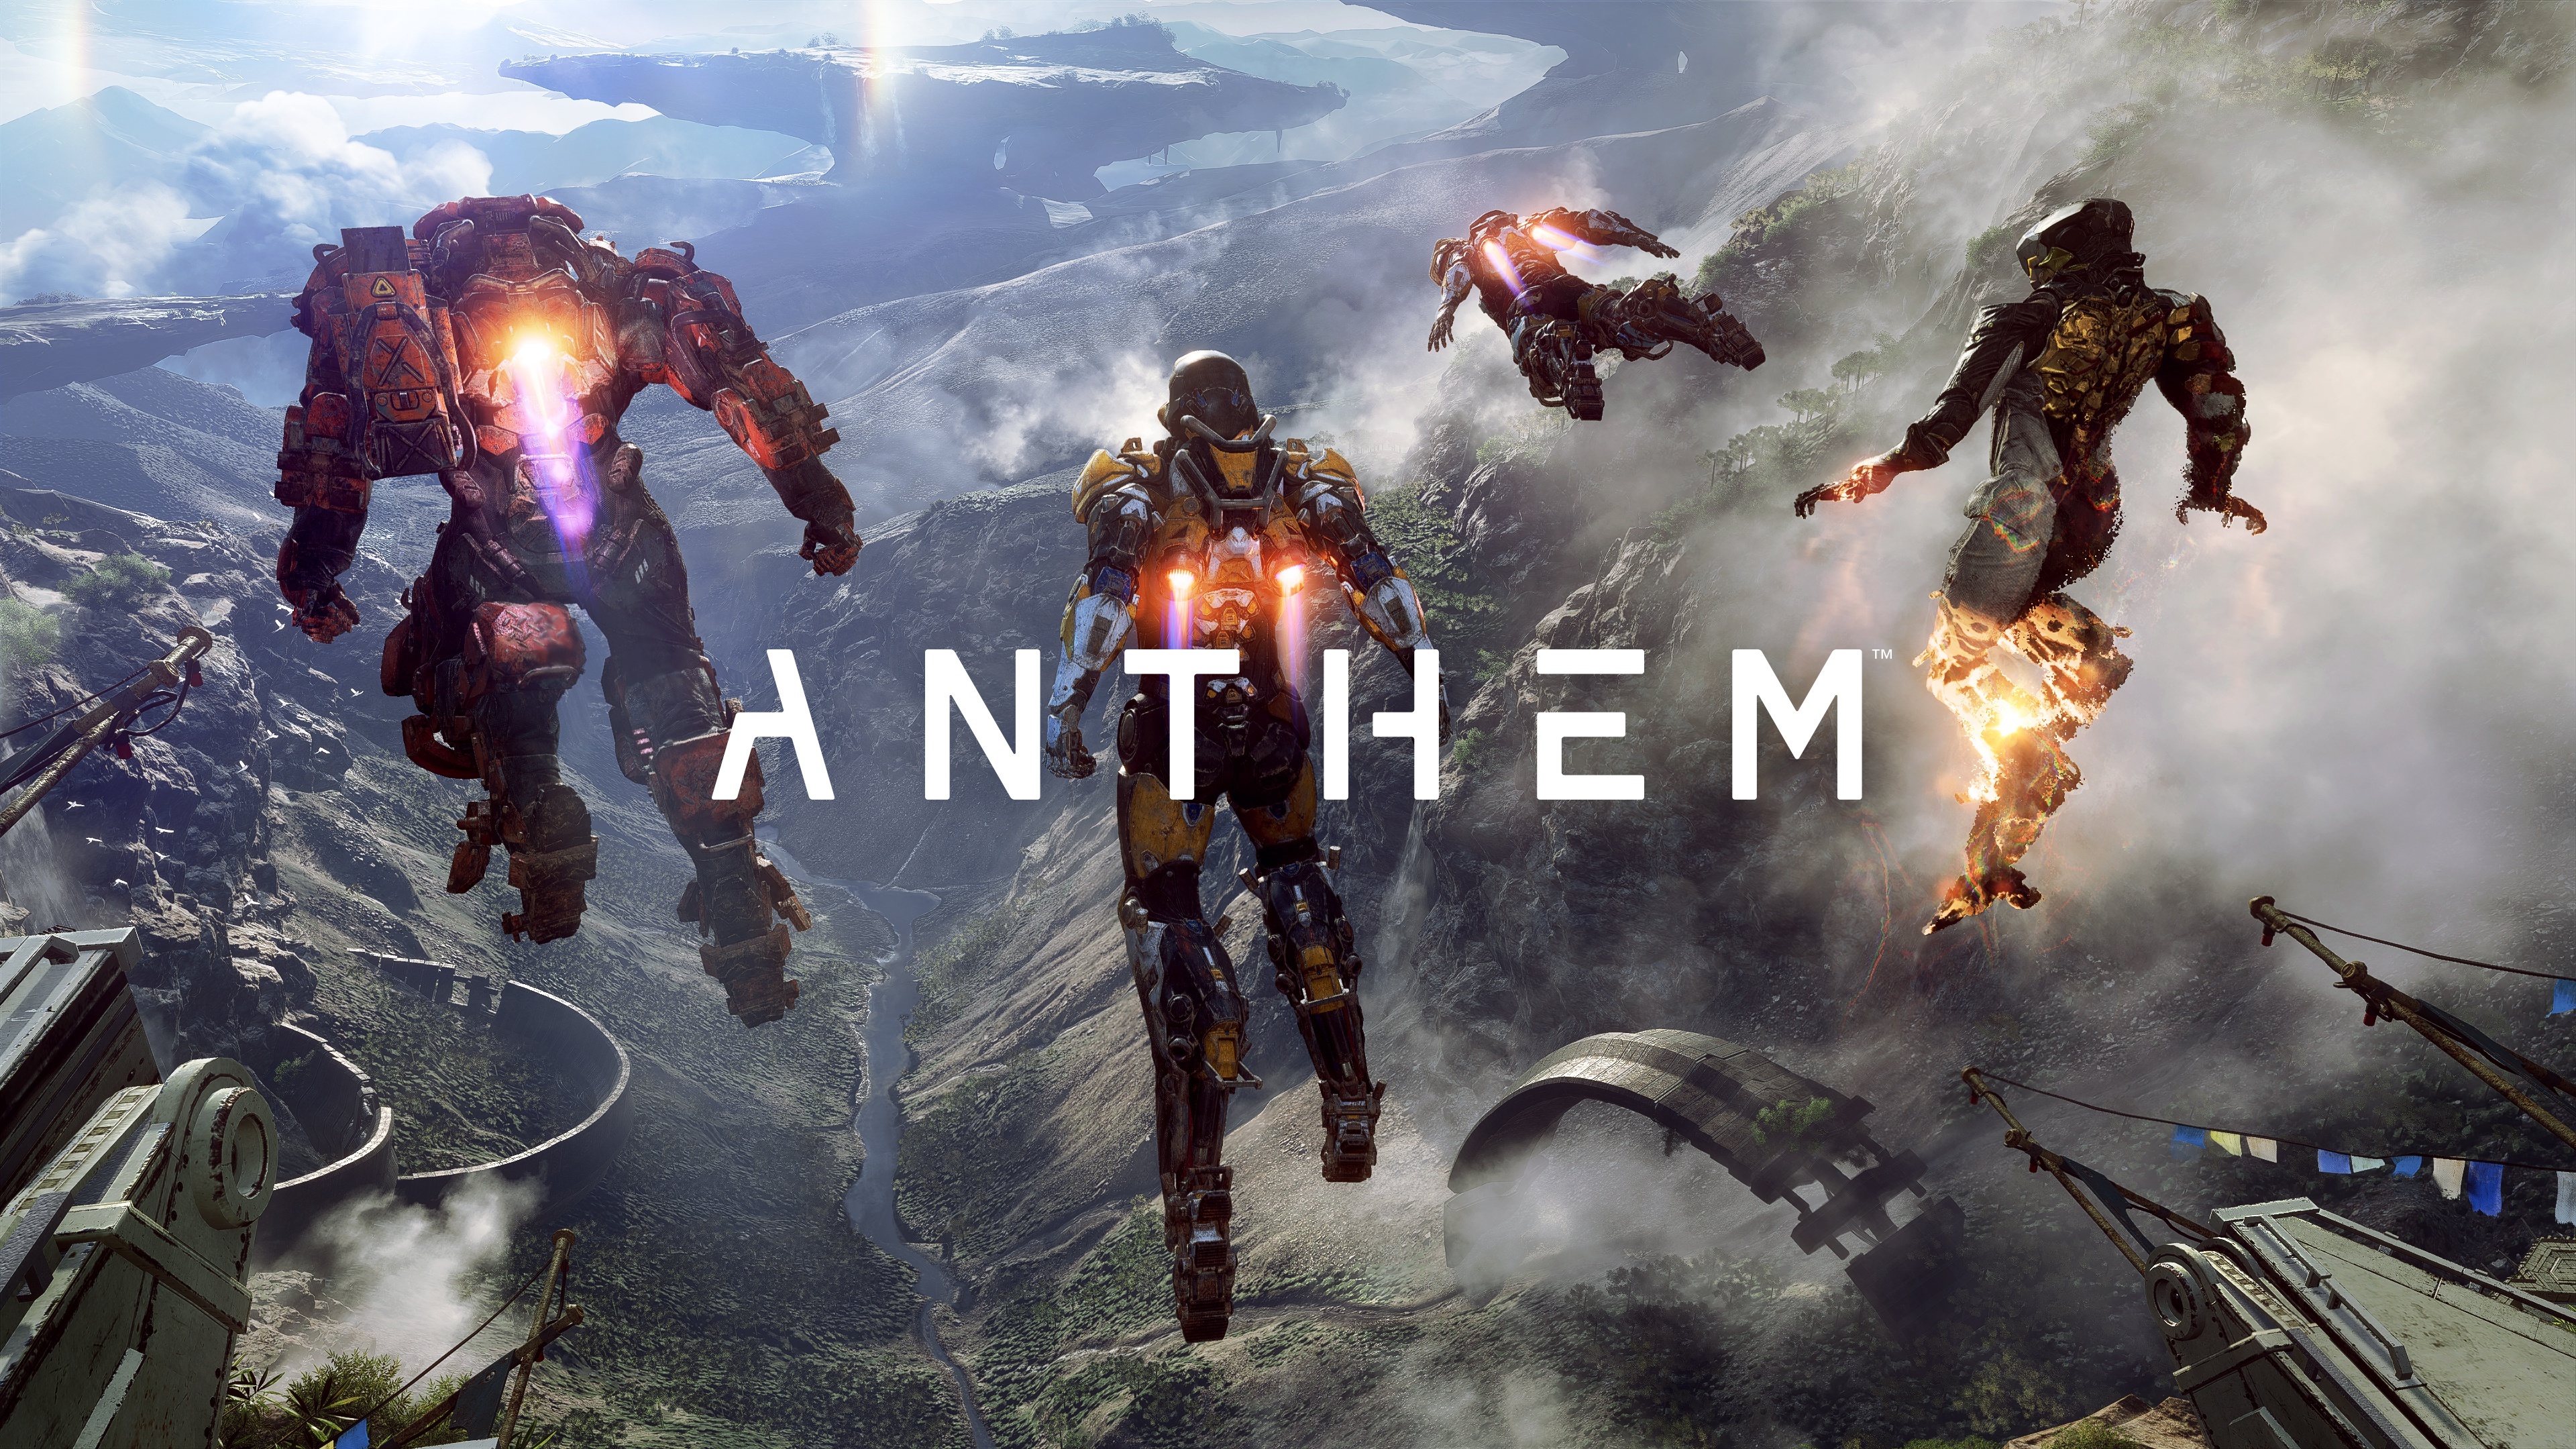 Action adventure game, Anthem video game, Game wallpapers, Game background images, 3840x2160 4K Desktop